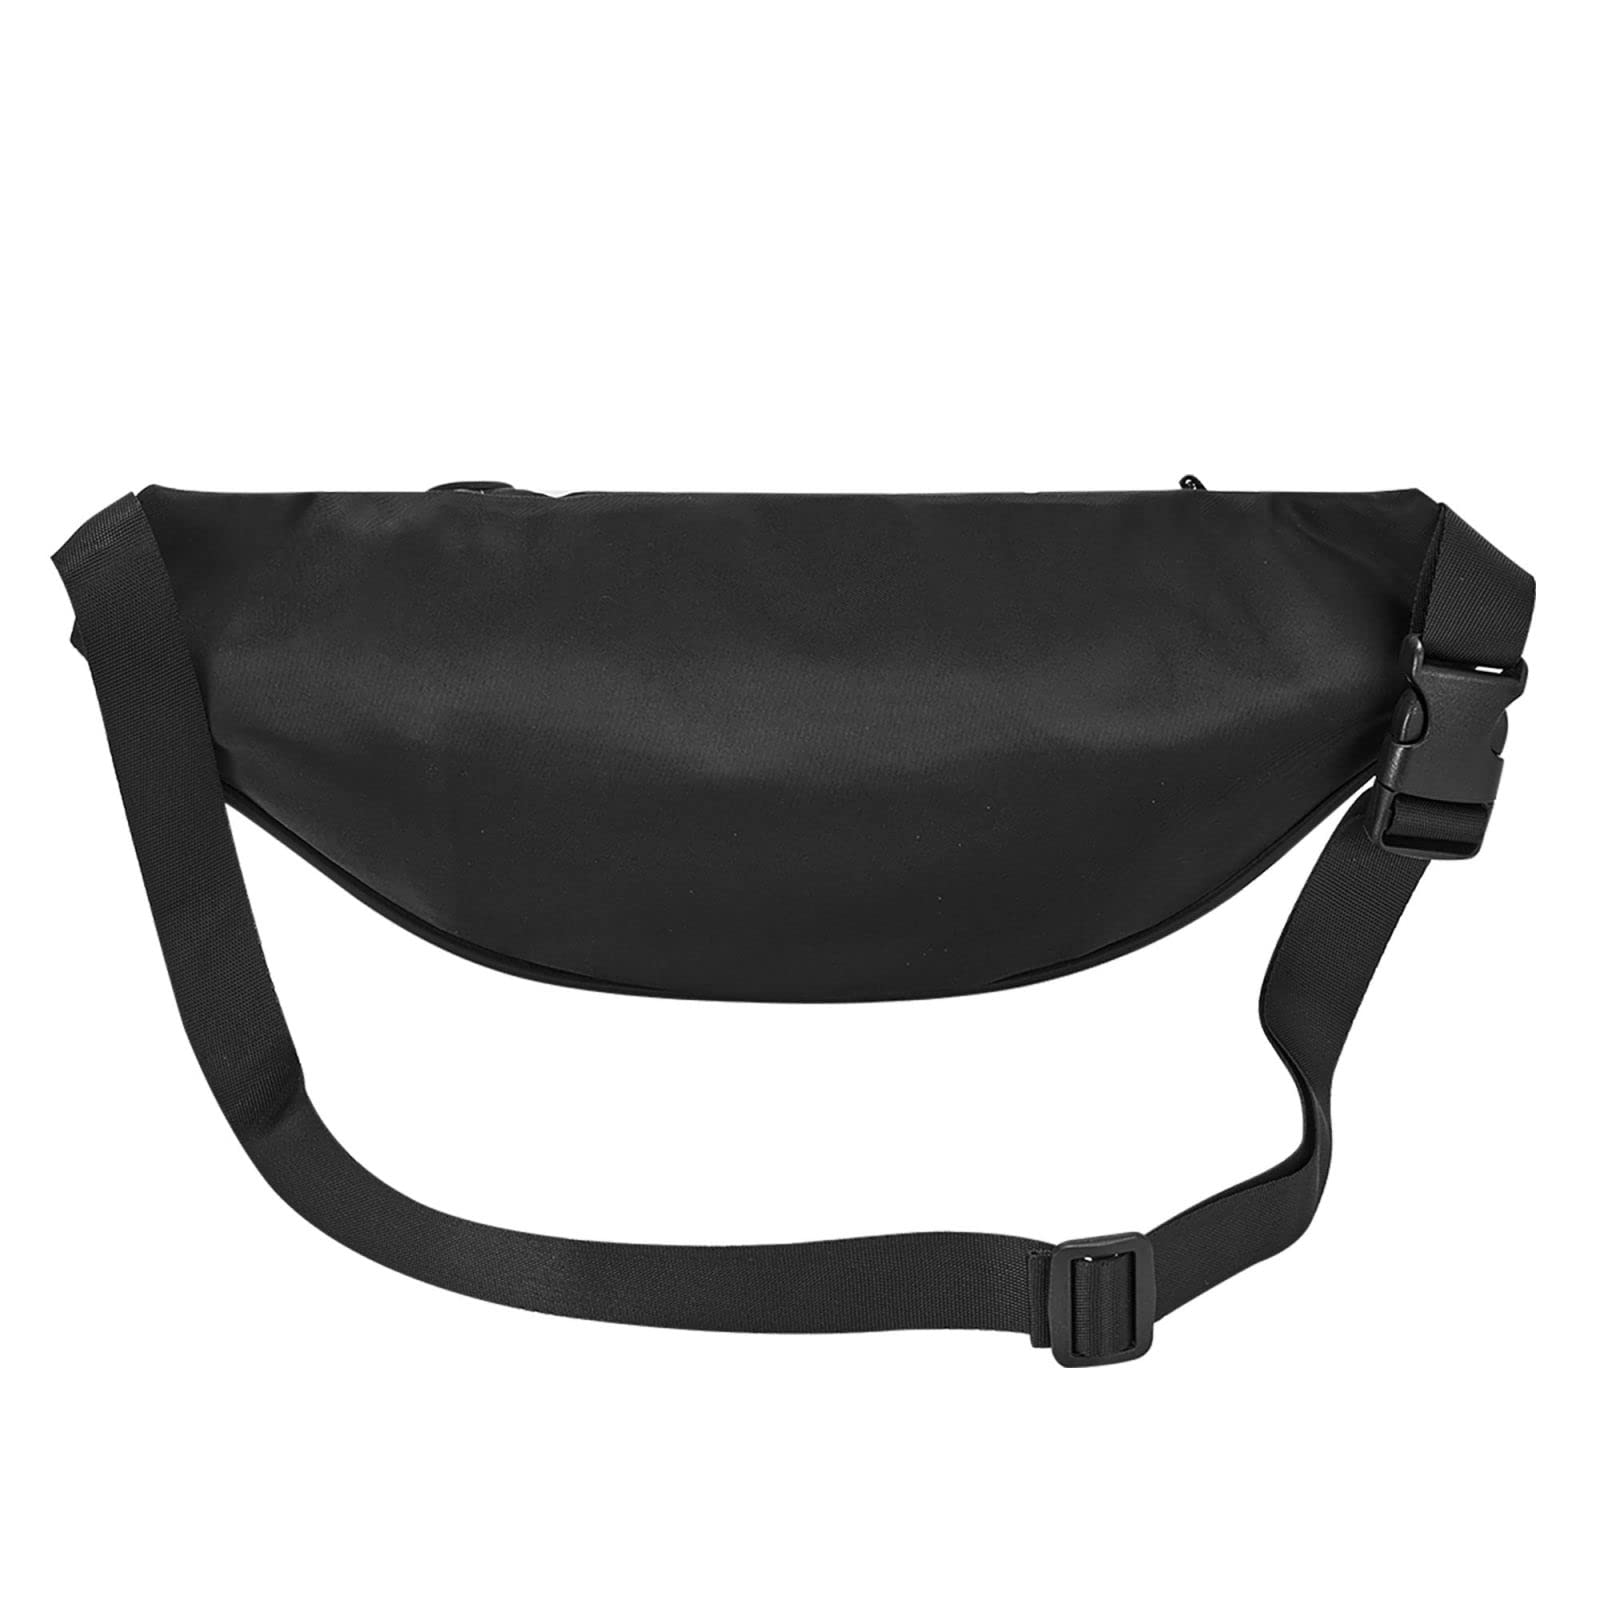 Bears Fanny Pack For Women And Men Fashion Waist Bag With Adjustable Strap For Hiking Running Cycling